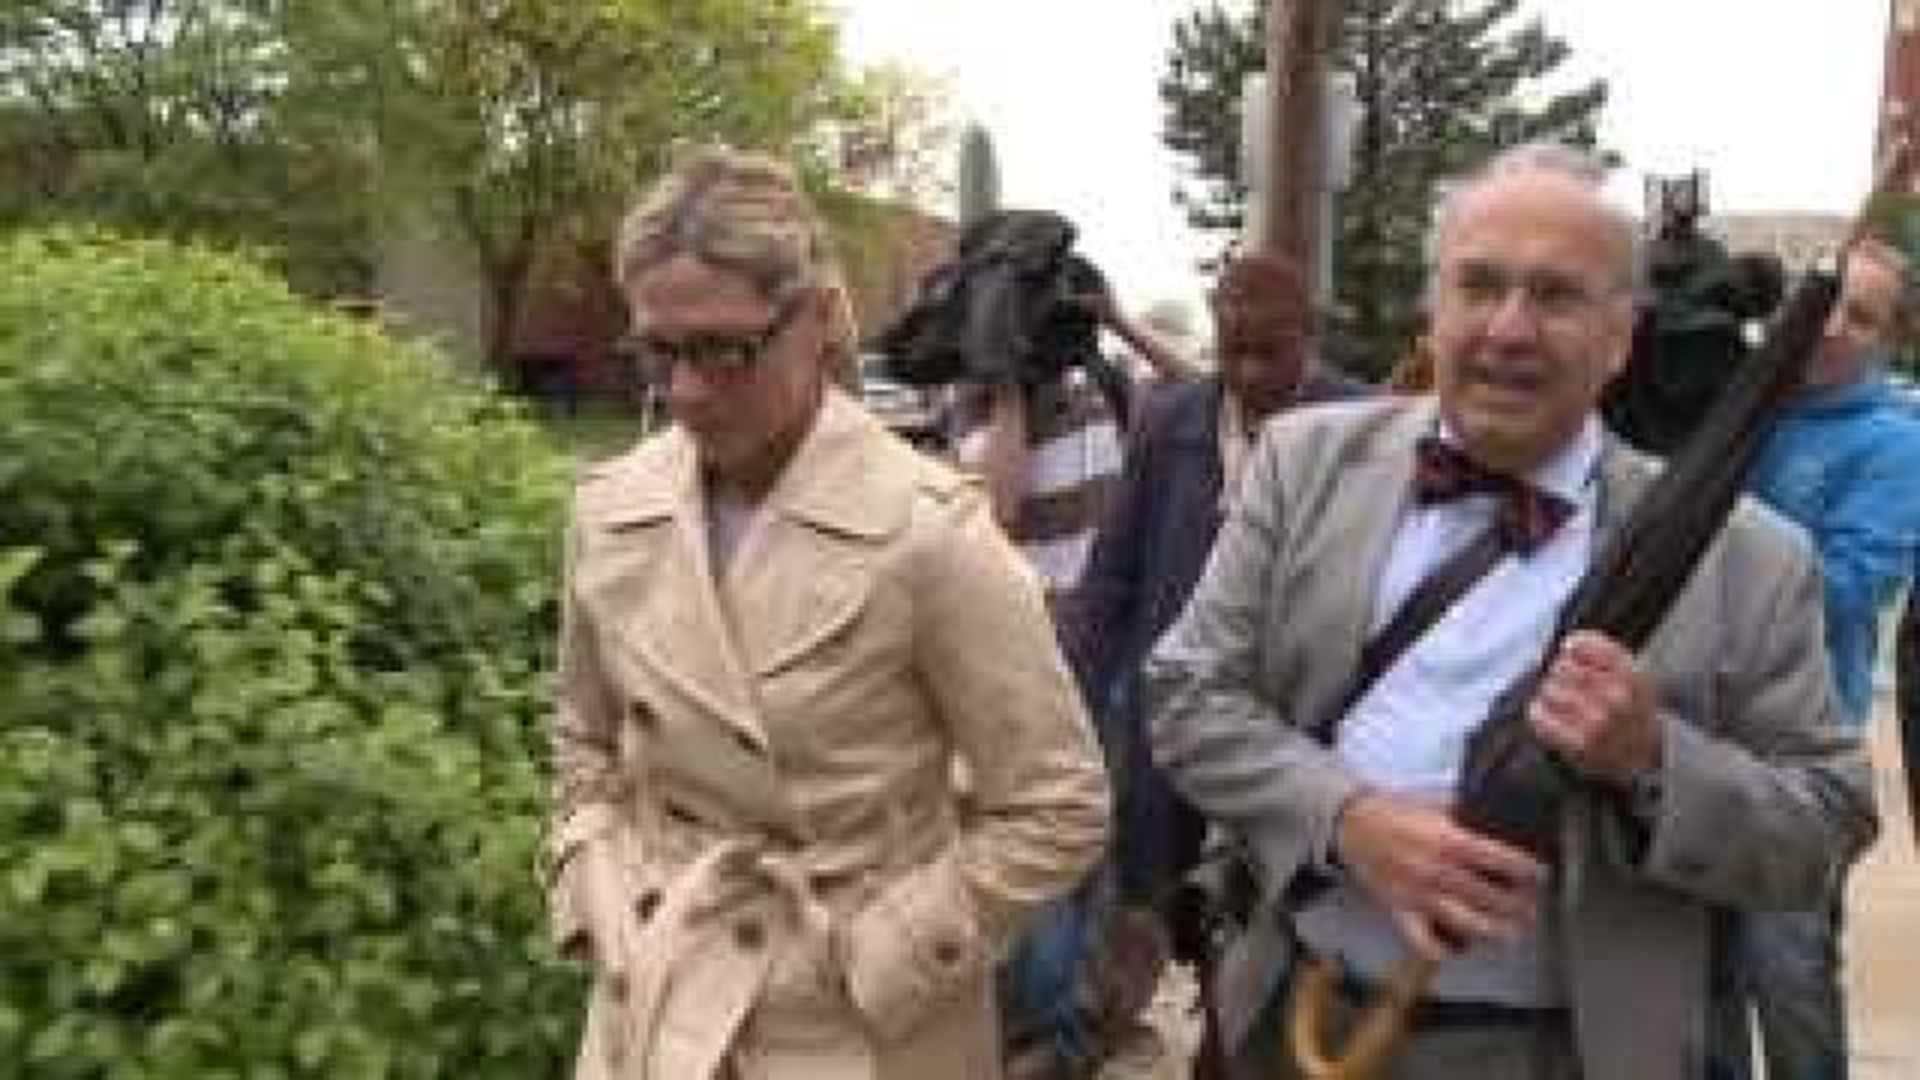 RAW VIDEO: Rita Crundwell leaves court after not-guilty plea